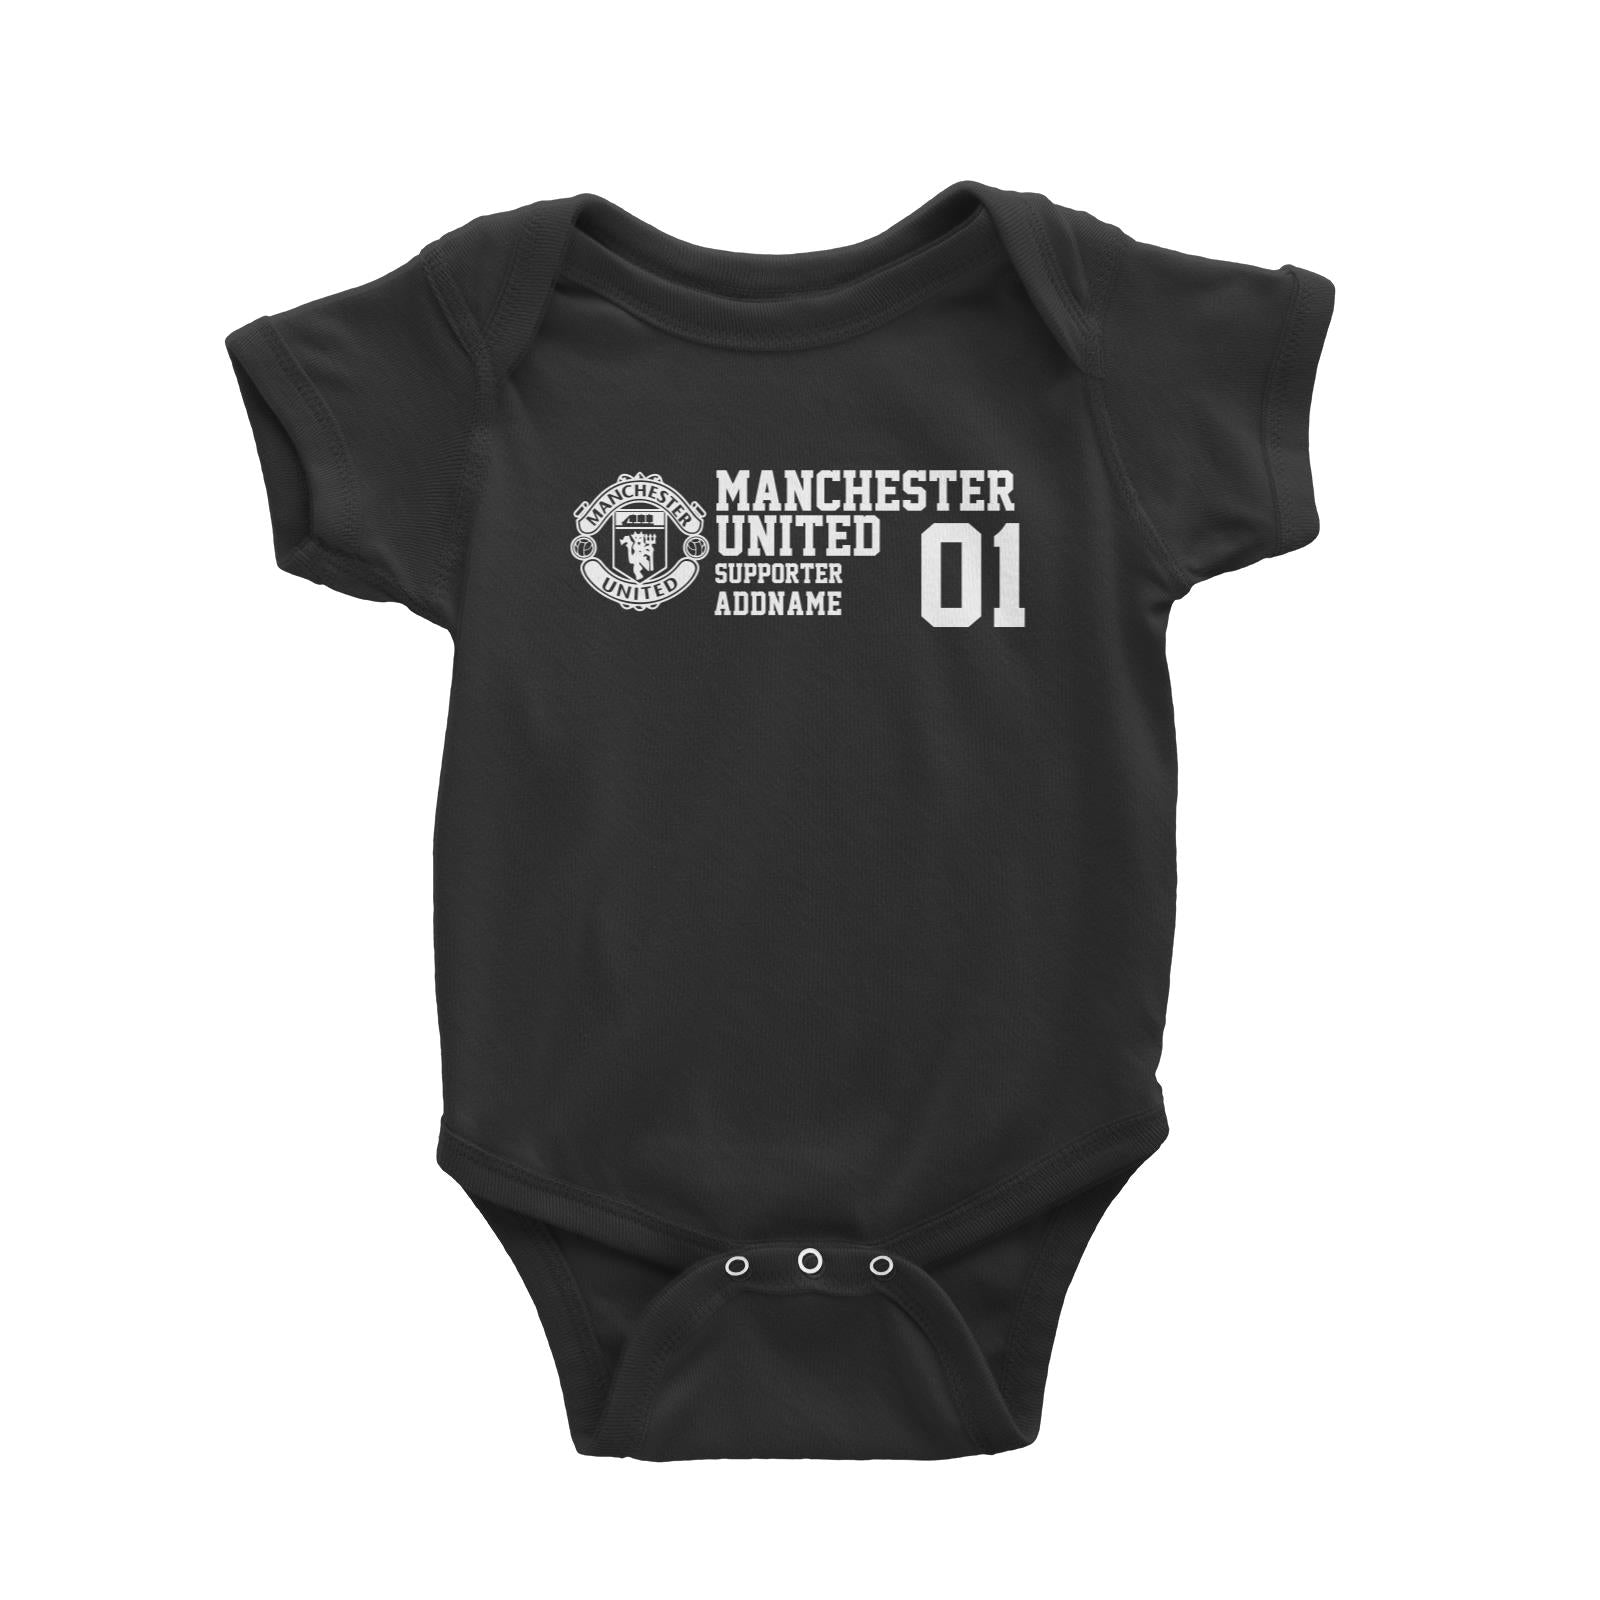 Manchester United Football Supporter Addname Baby Romper